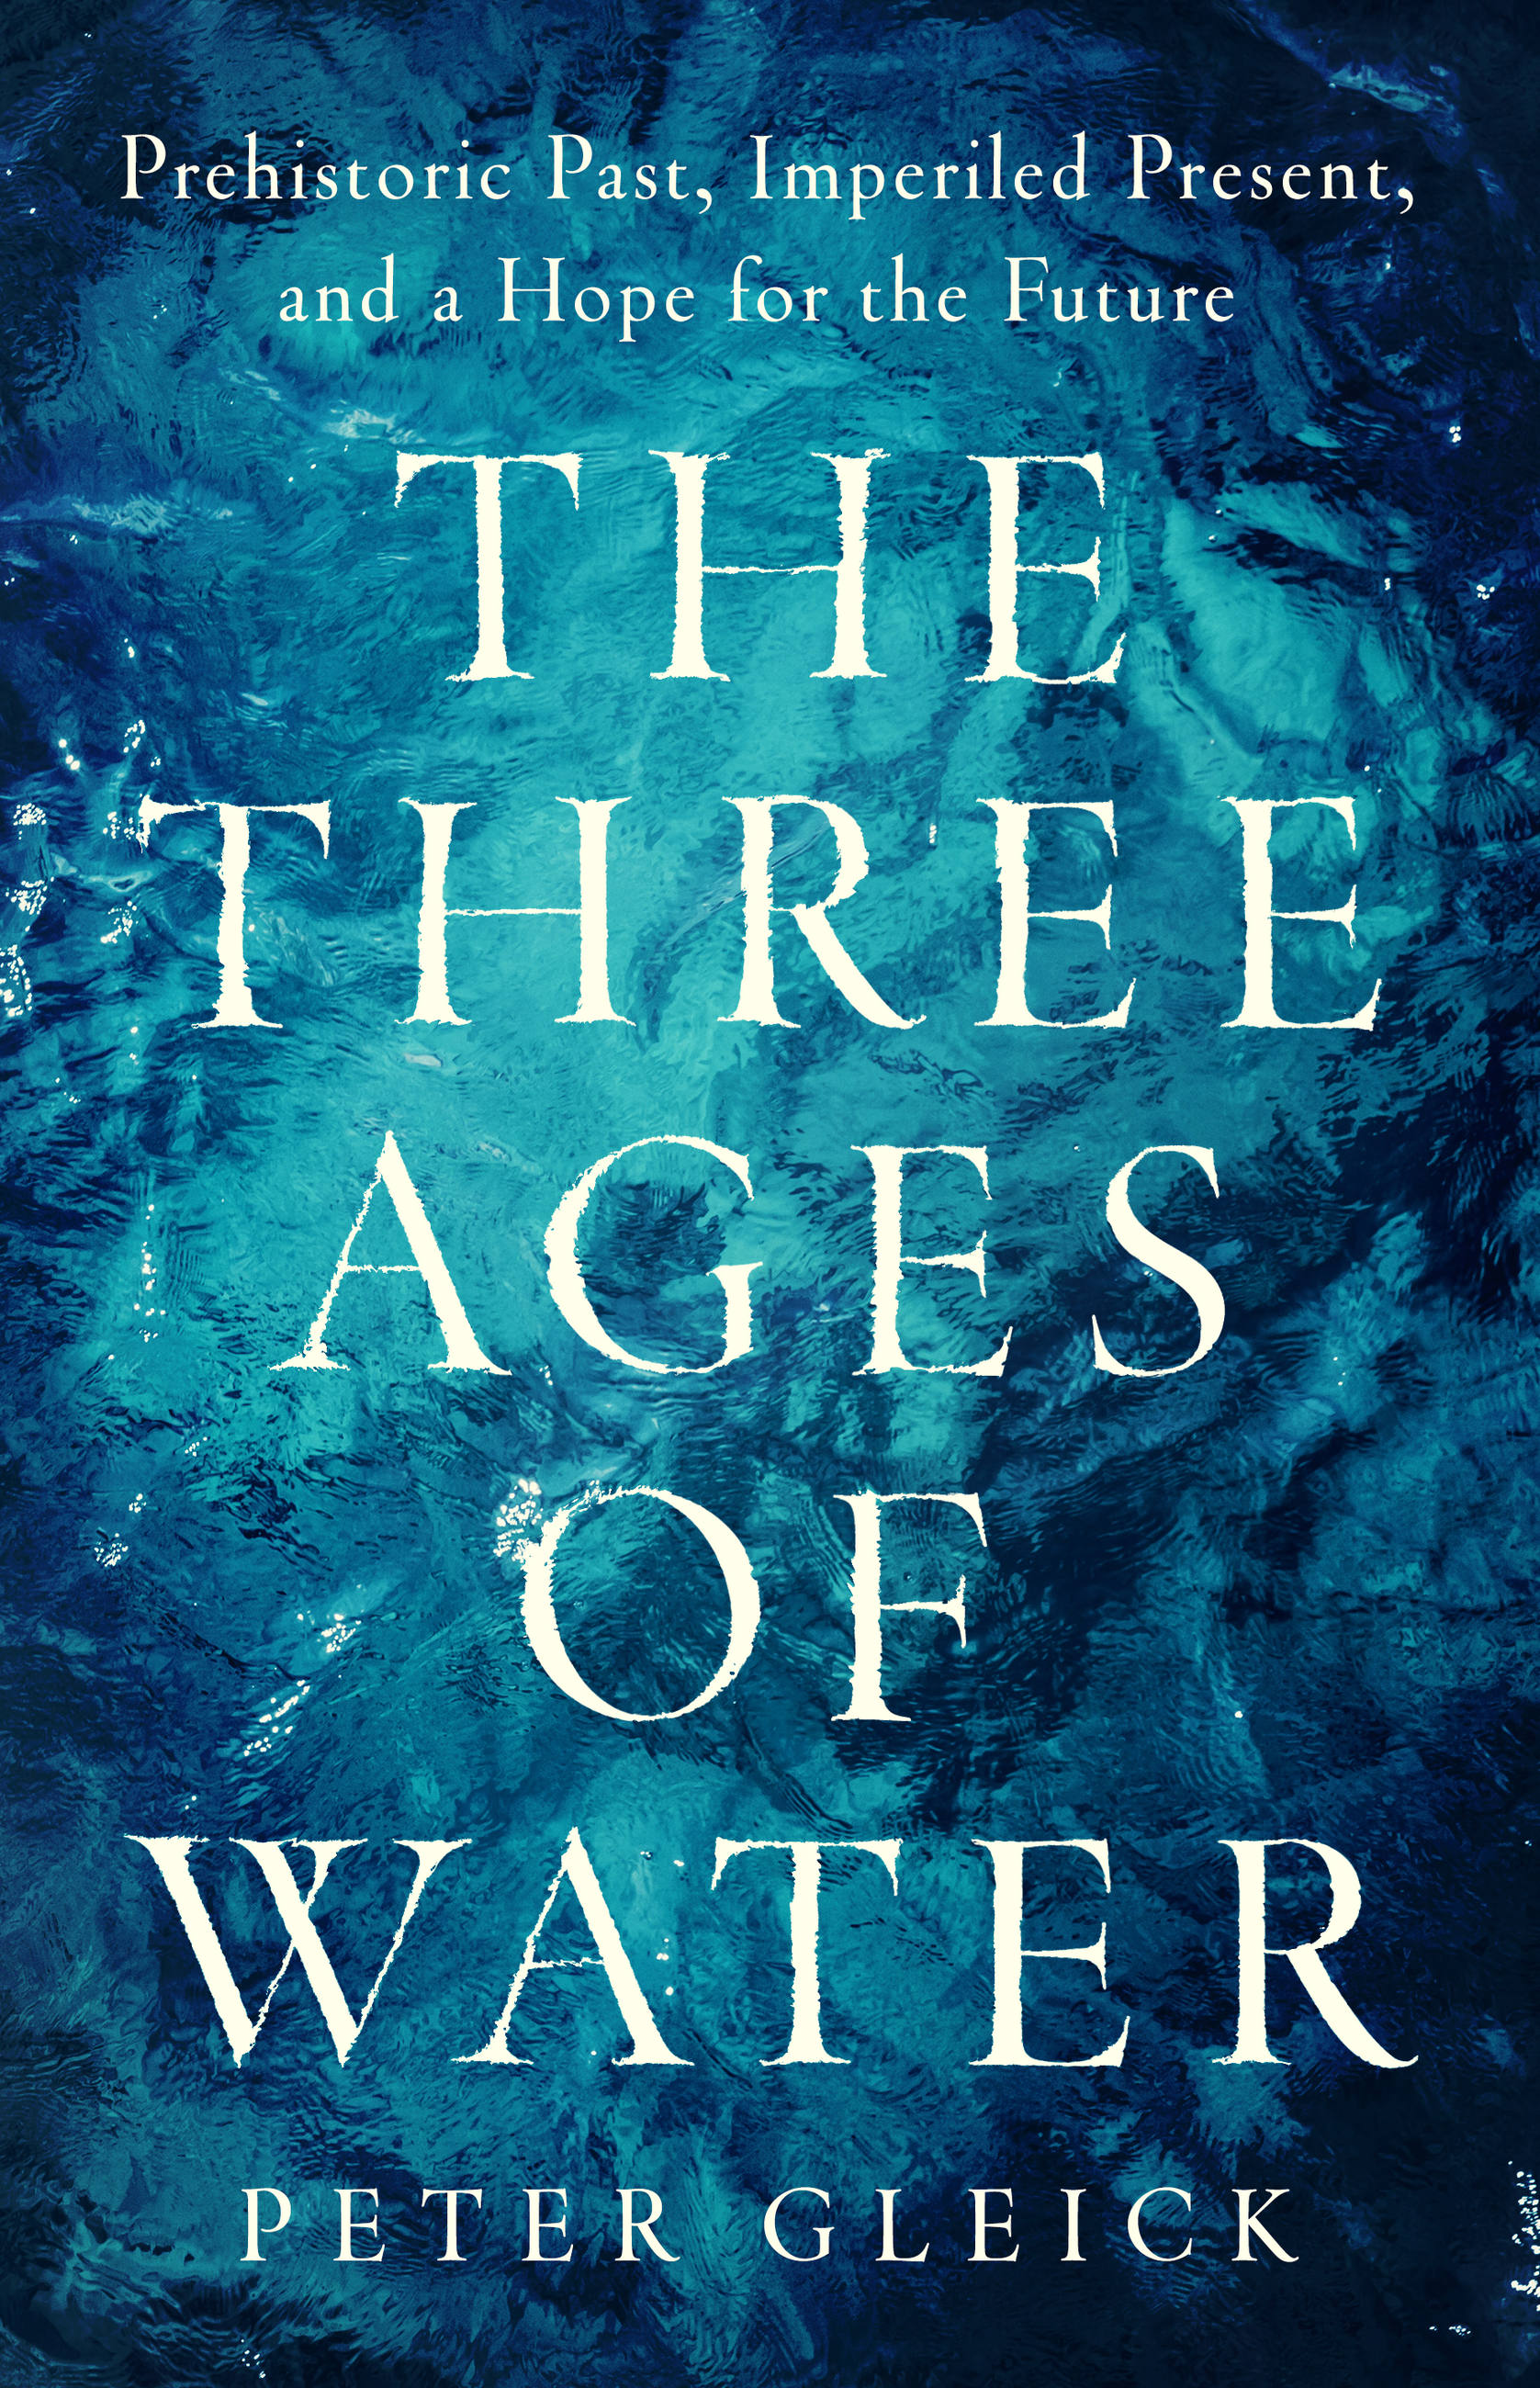 I know there is a great diversity of water experts and voices on this platform. May I offer an update? My new book, "The Three Ages of Water: Pr...